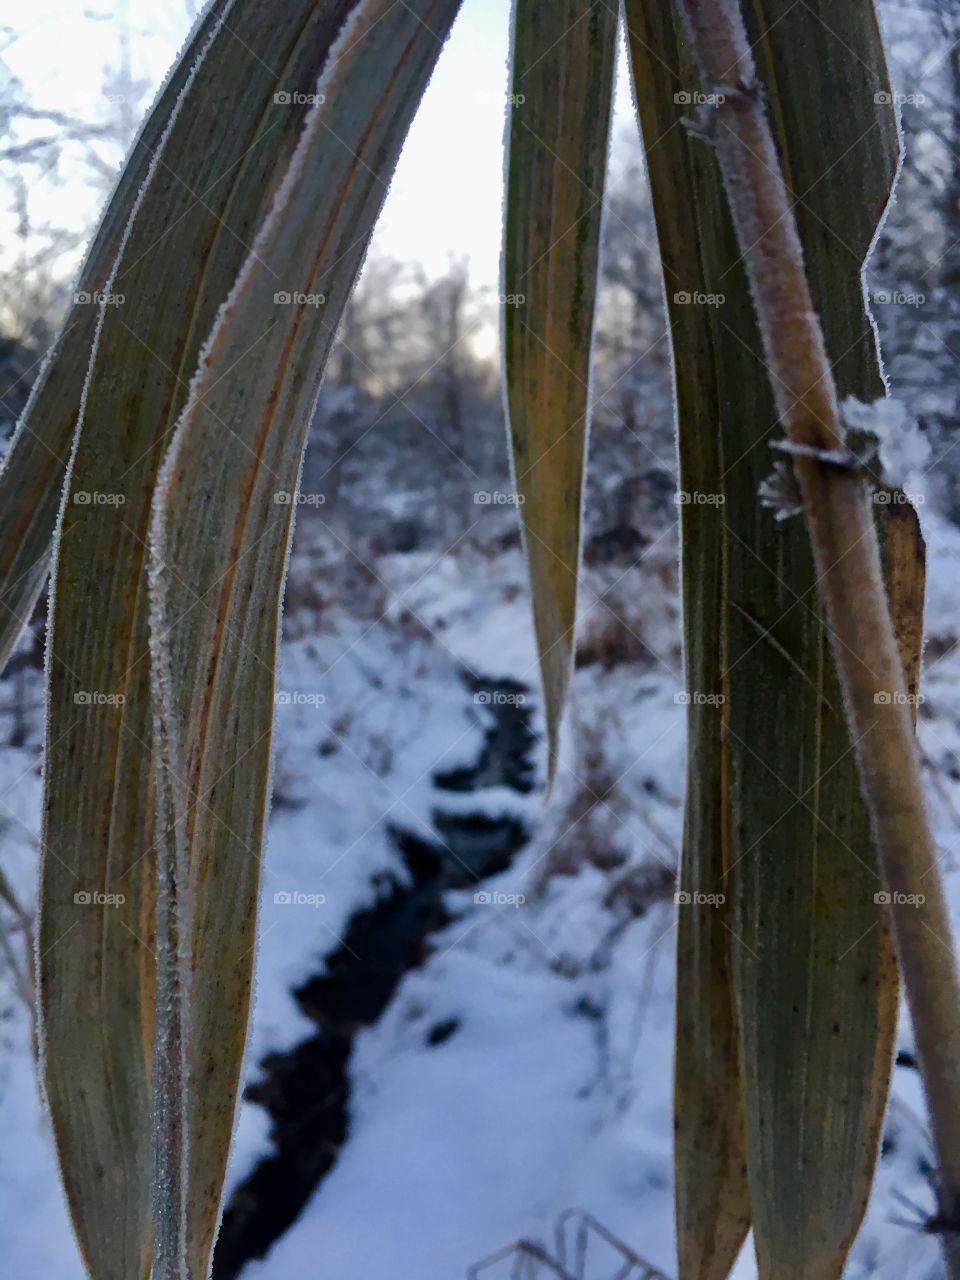 Wilted cane leaves droop in the snow covered forest